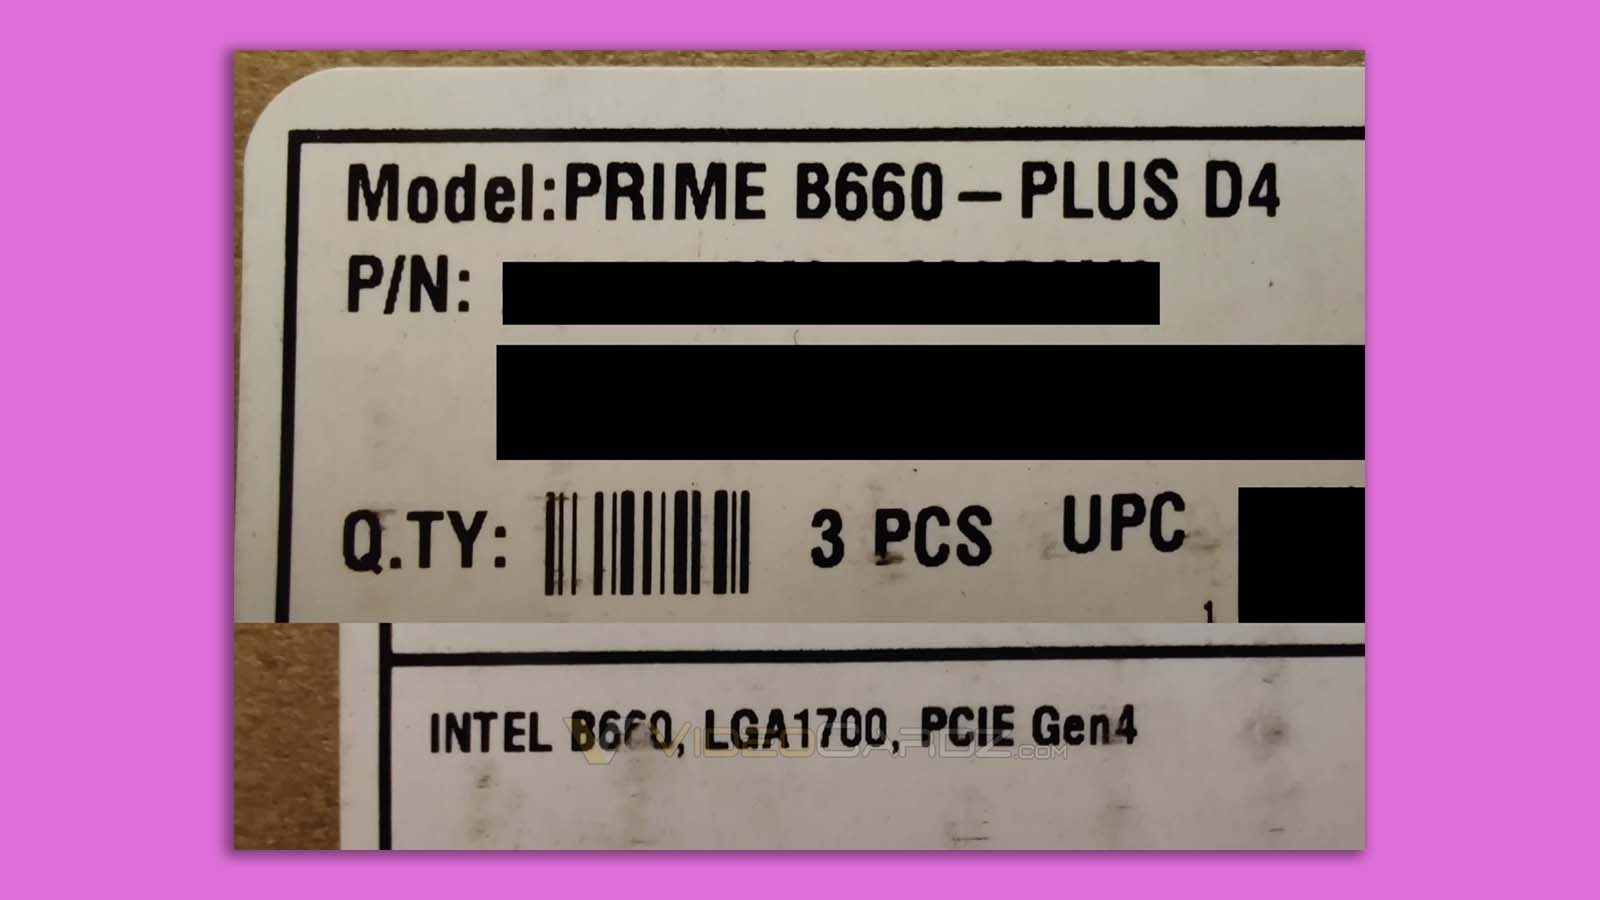 A label for an Asus Prime B660-Plus D4 motherboard showing PCIe Gen4 support